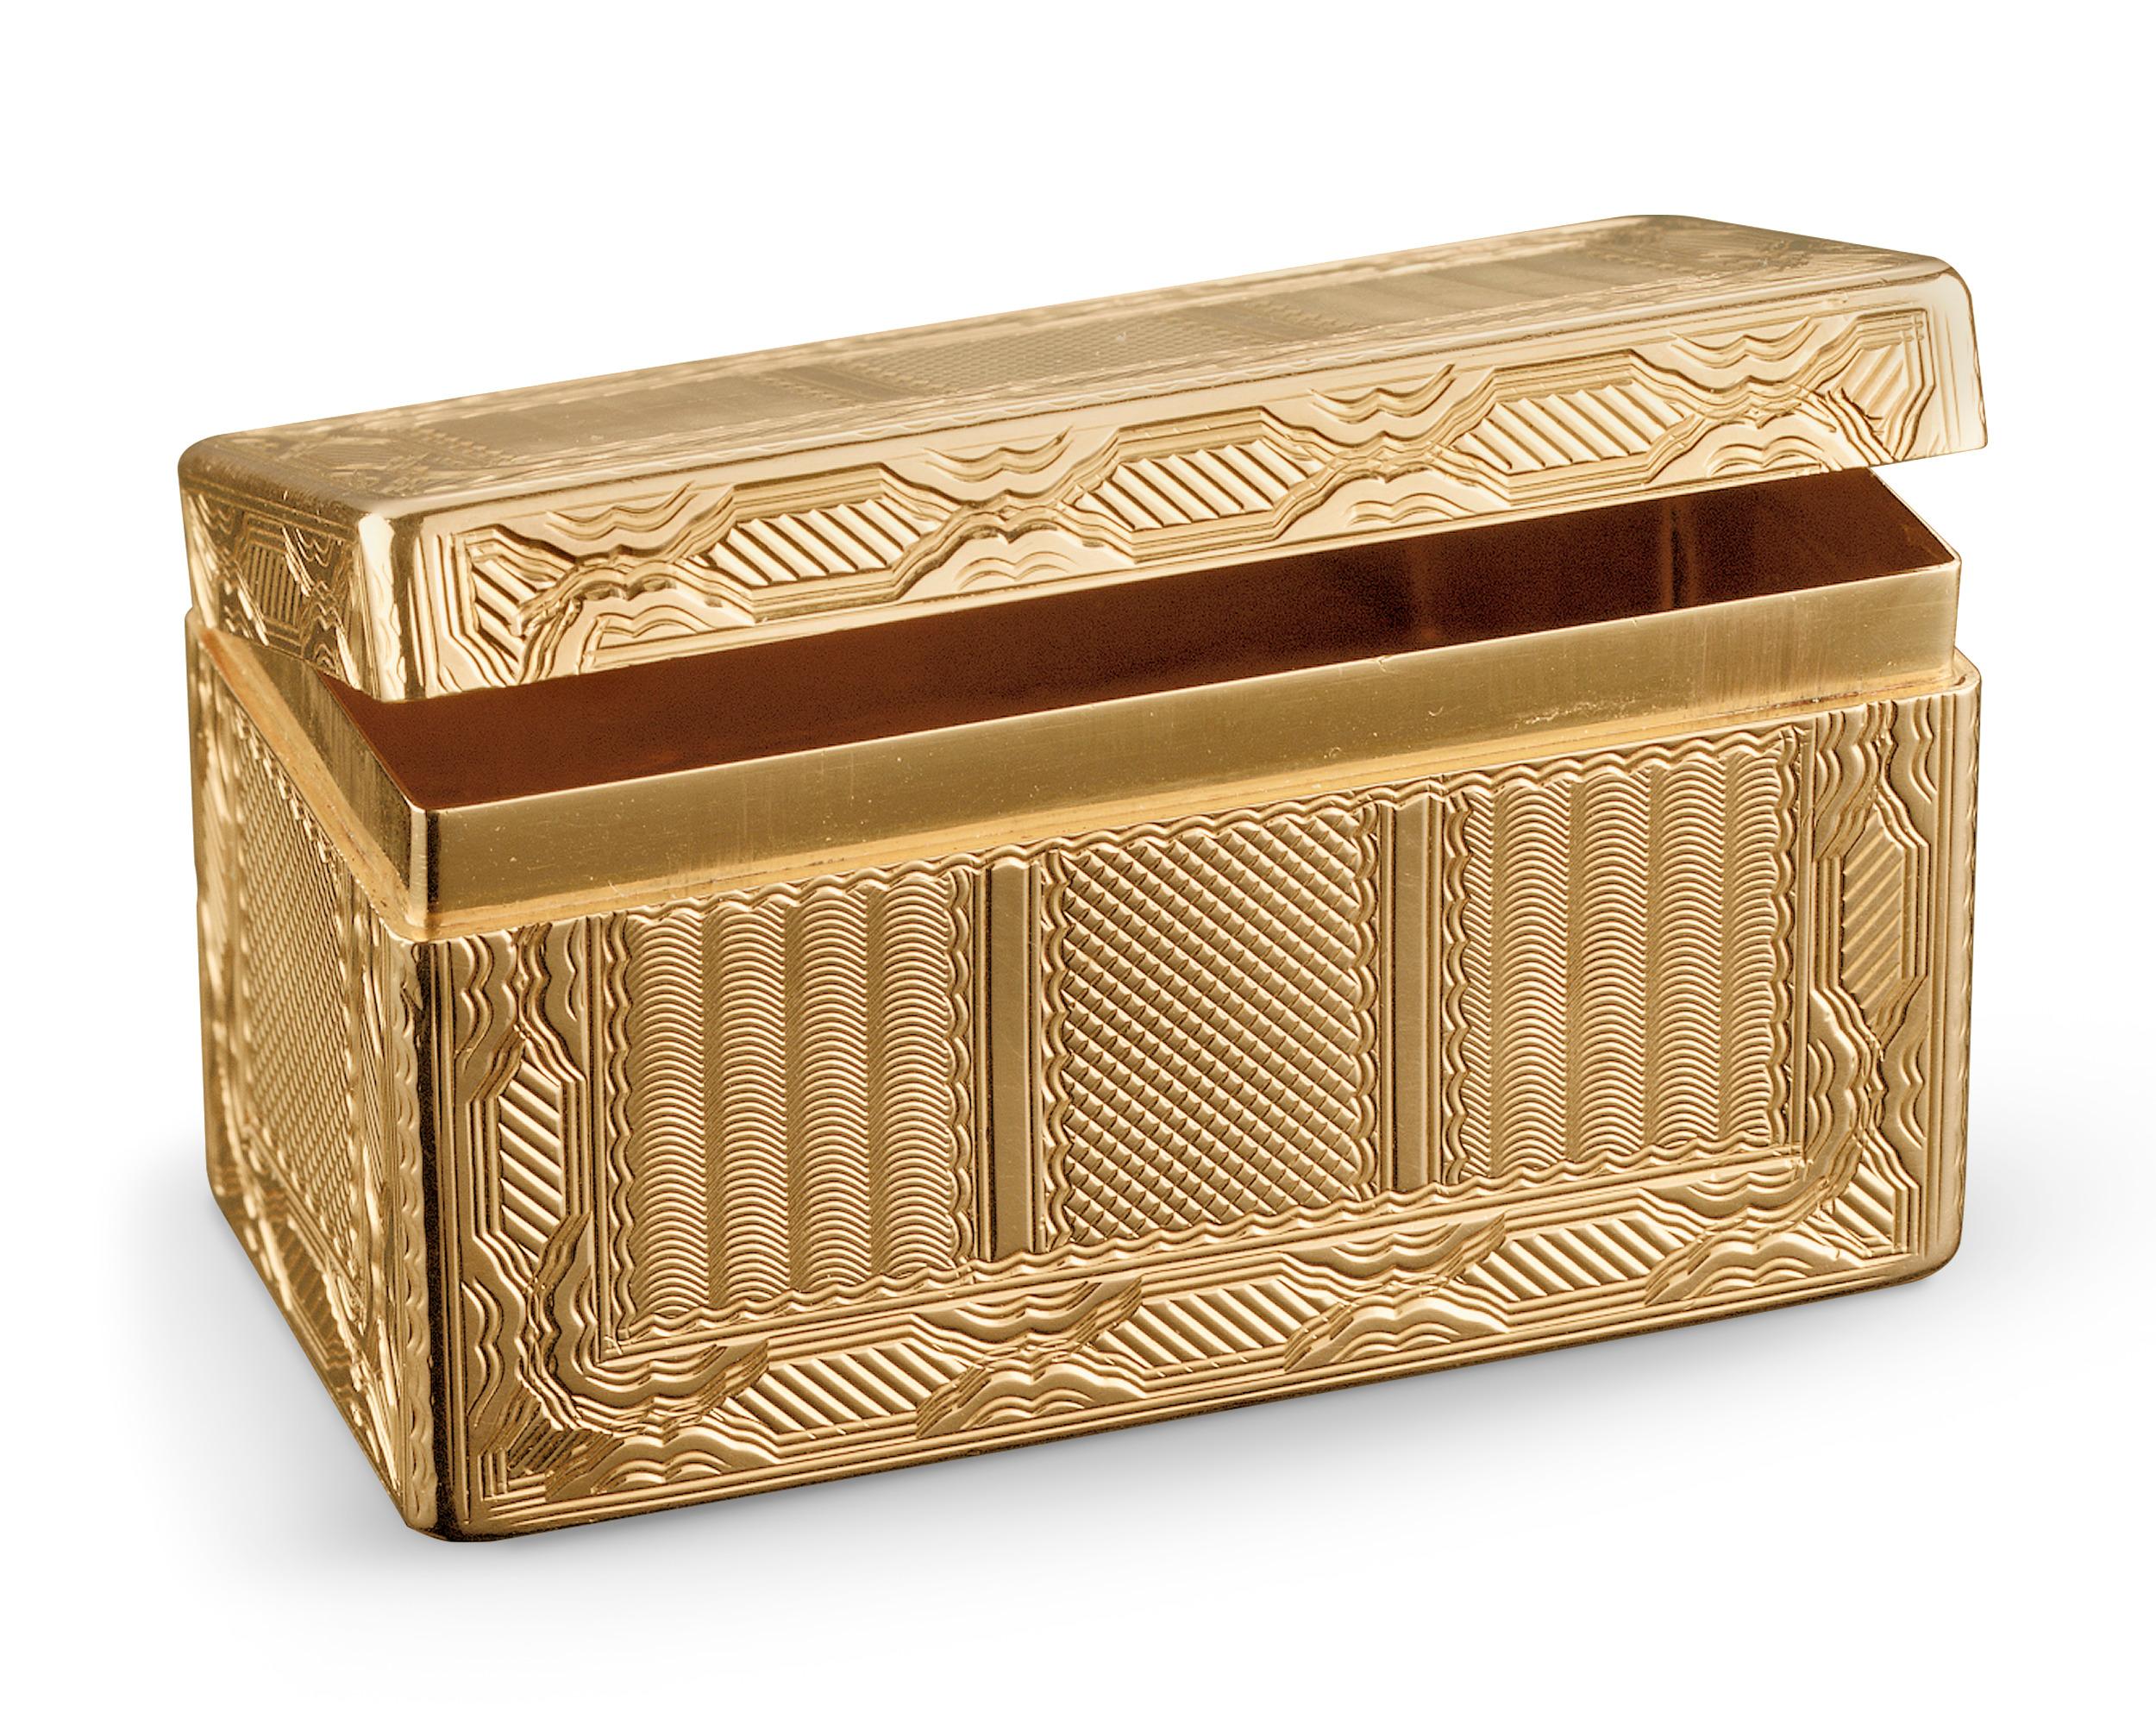 This important Louis XV gold snuff box is from the prestigious collection of the Duke and Duchess of Windsor. The engine-turned gold box originally sold at Sotheby’s historic sale The Jewels of the Late Duchess of Windsor, which was held in Geneva